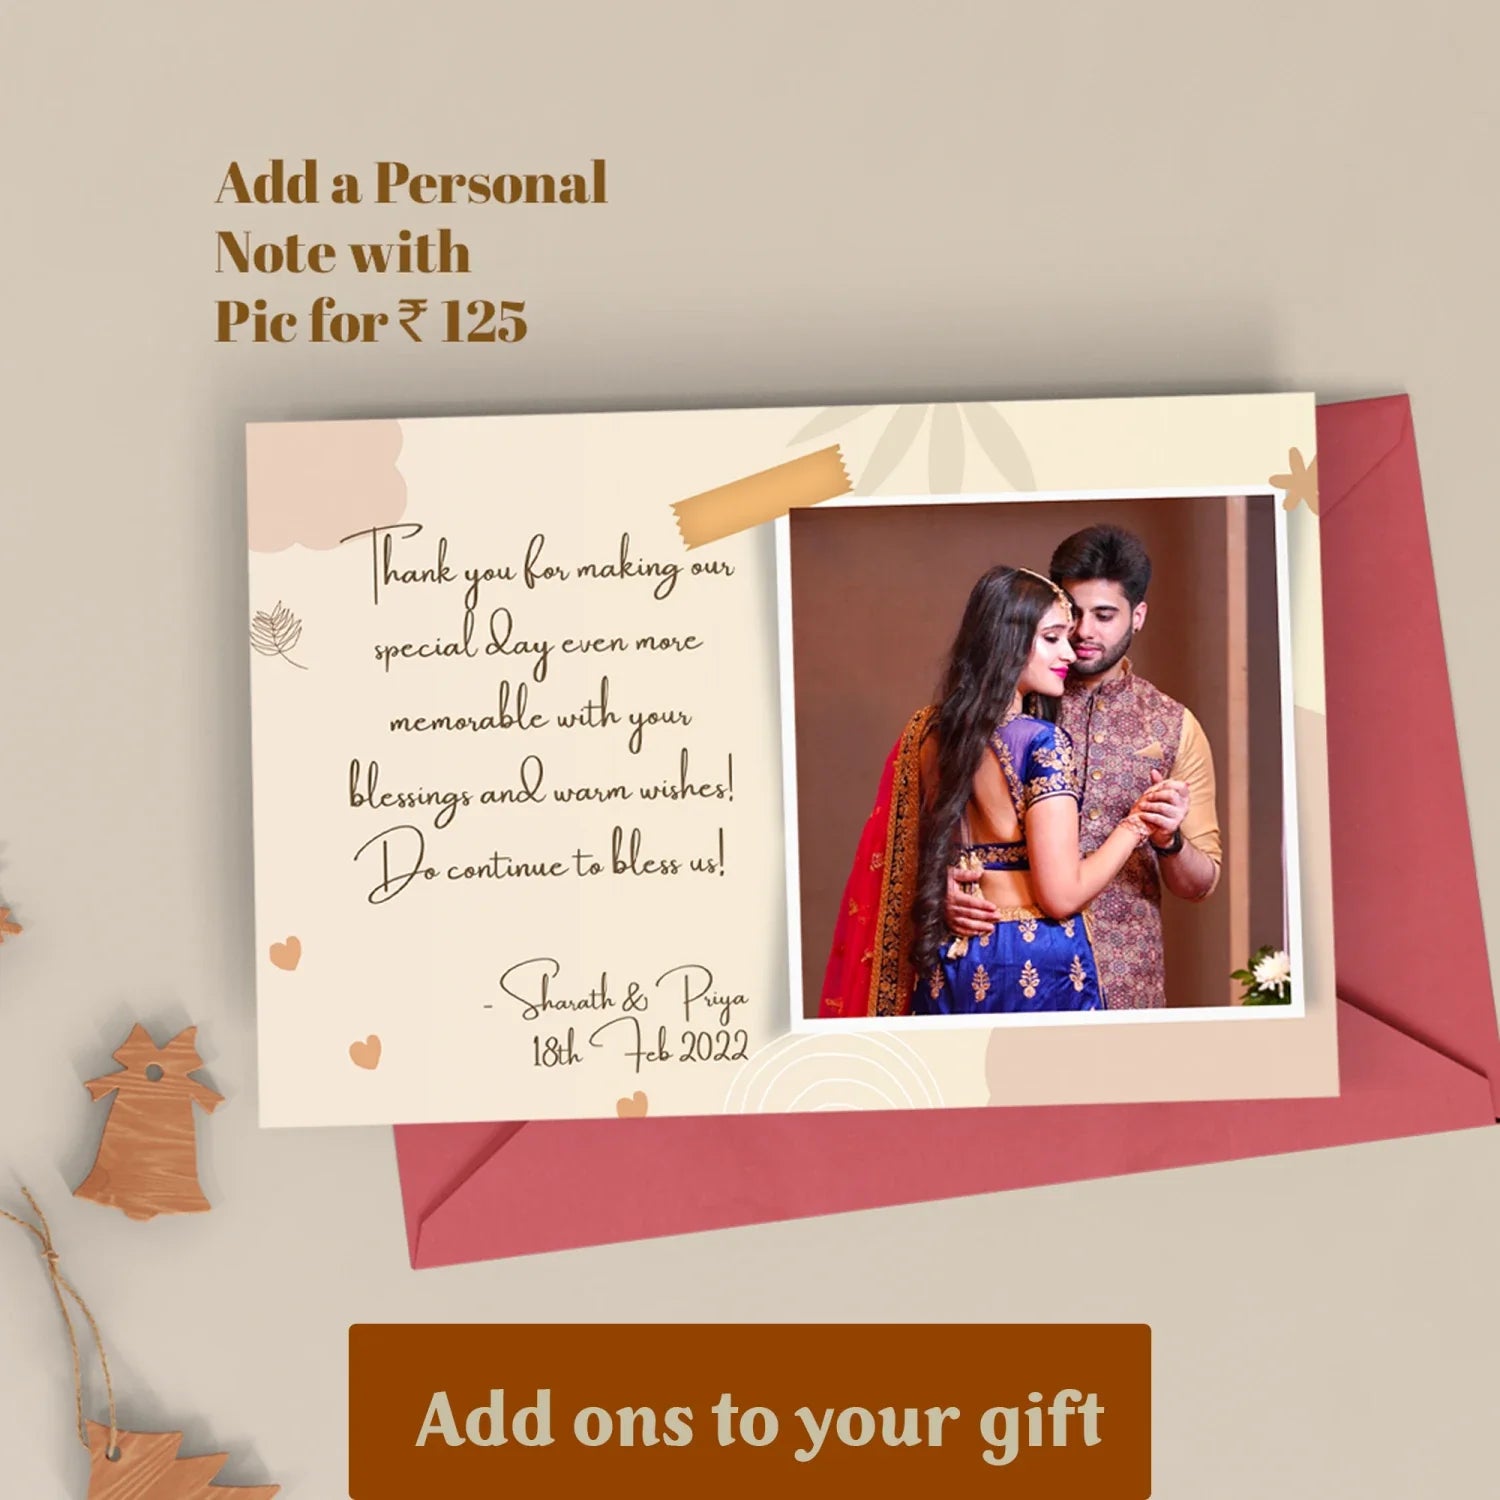 Personalised All in One Men's Combo (4 pcs) - Tan. Add your personal note and polaroid picture to customise the gifts and give it a personal touch.